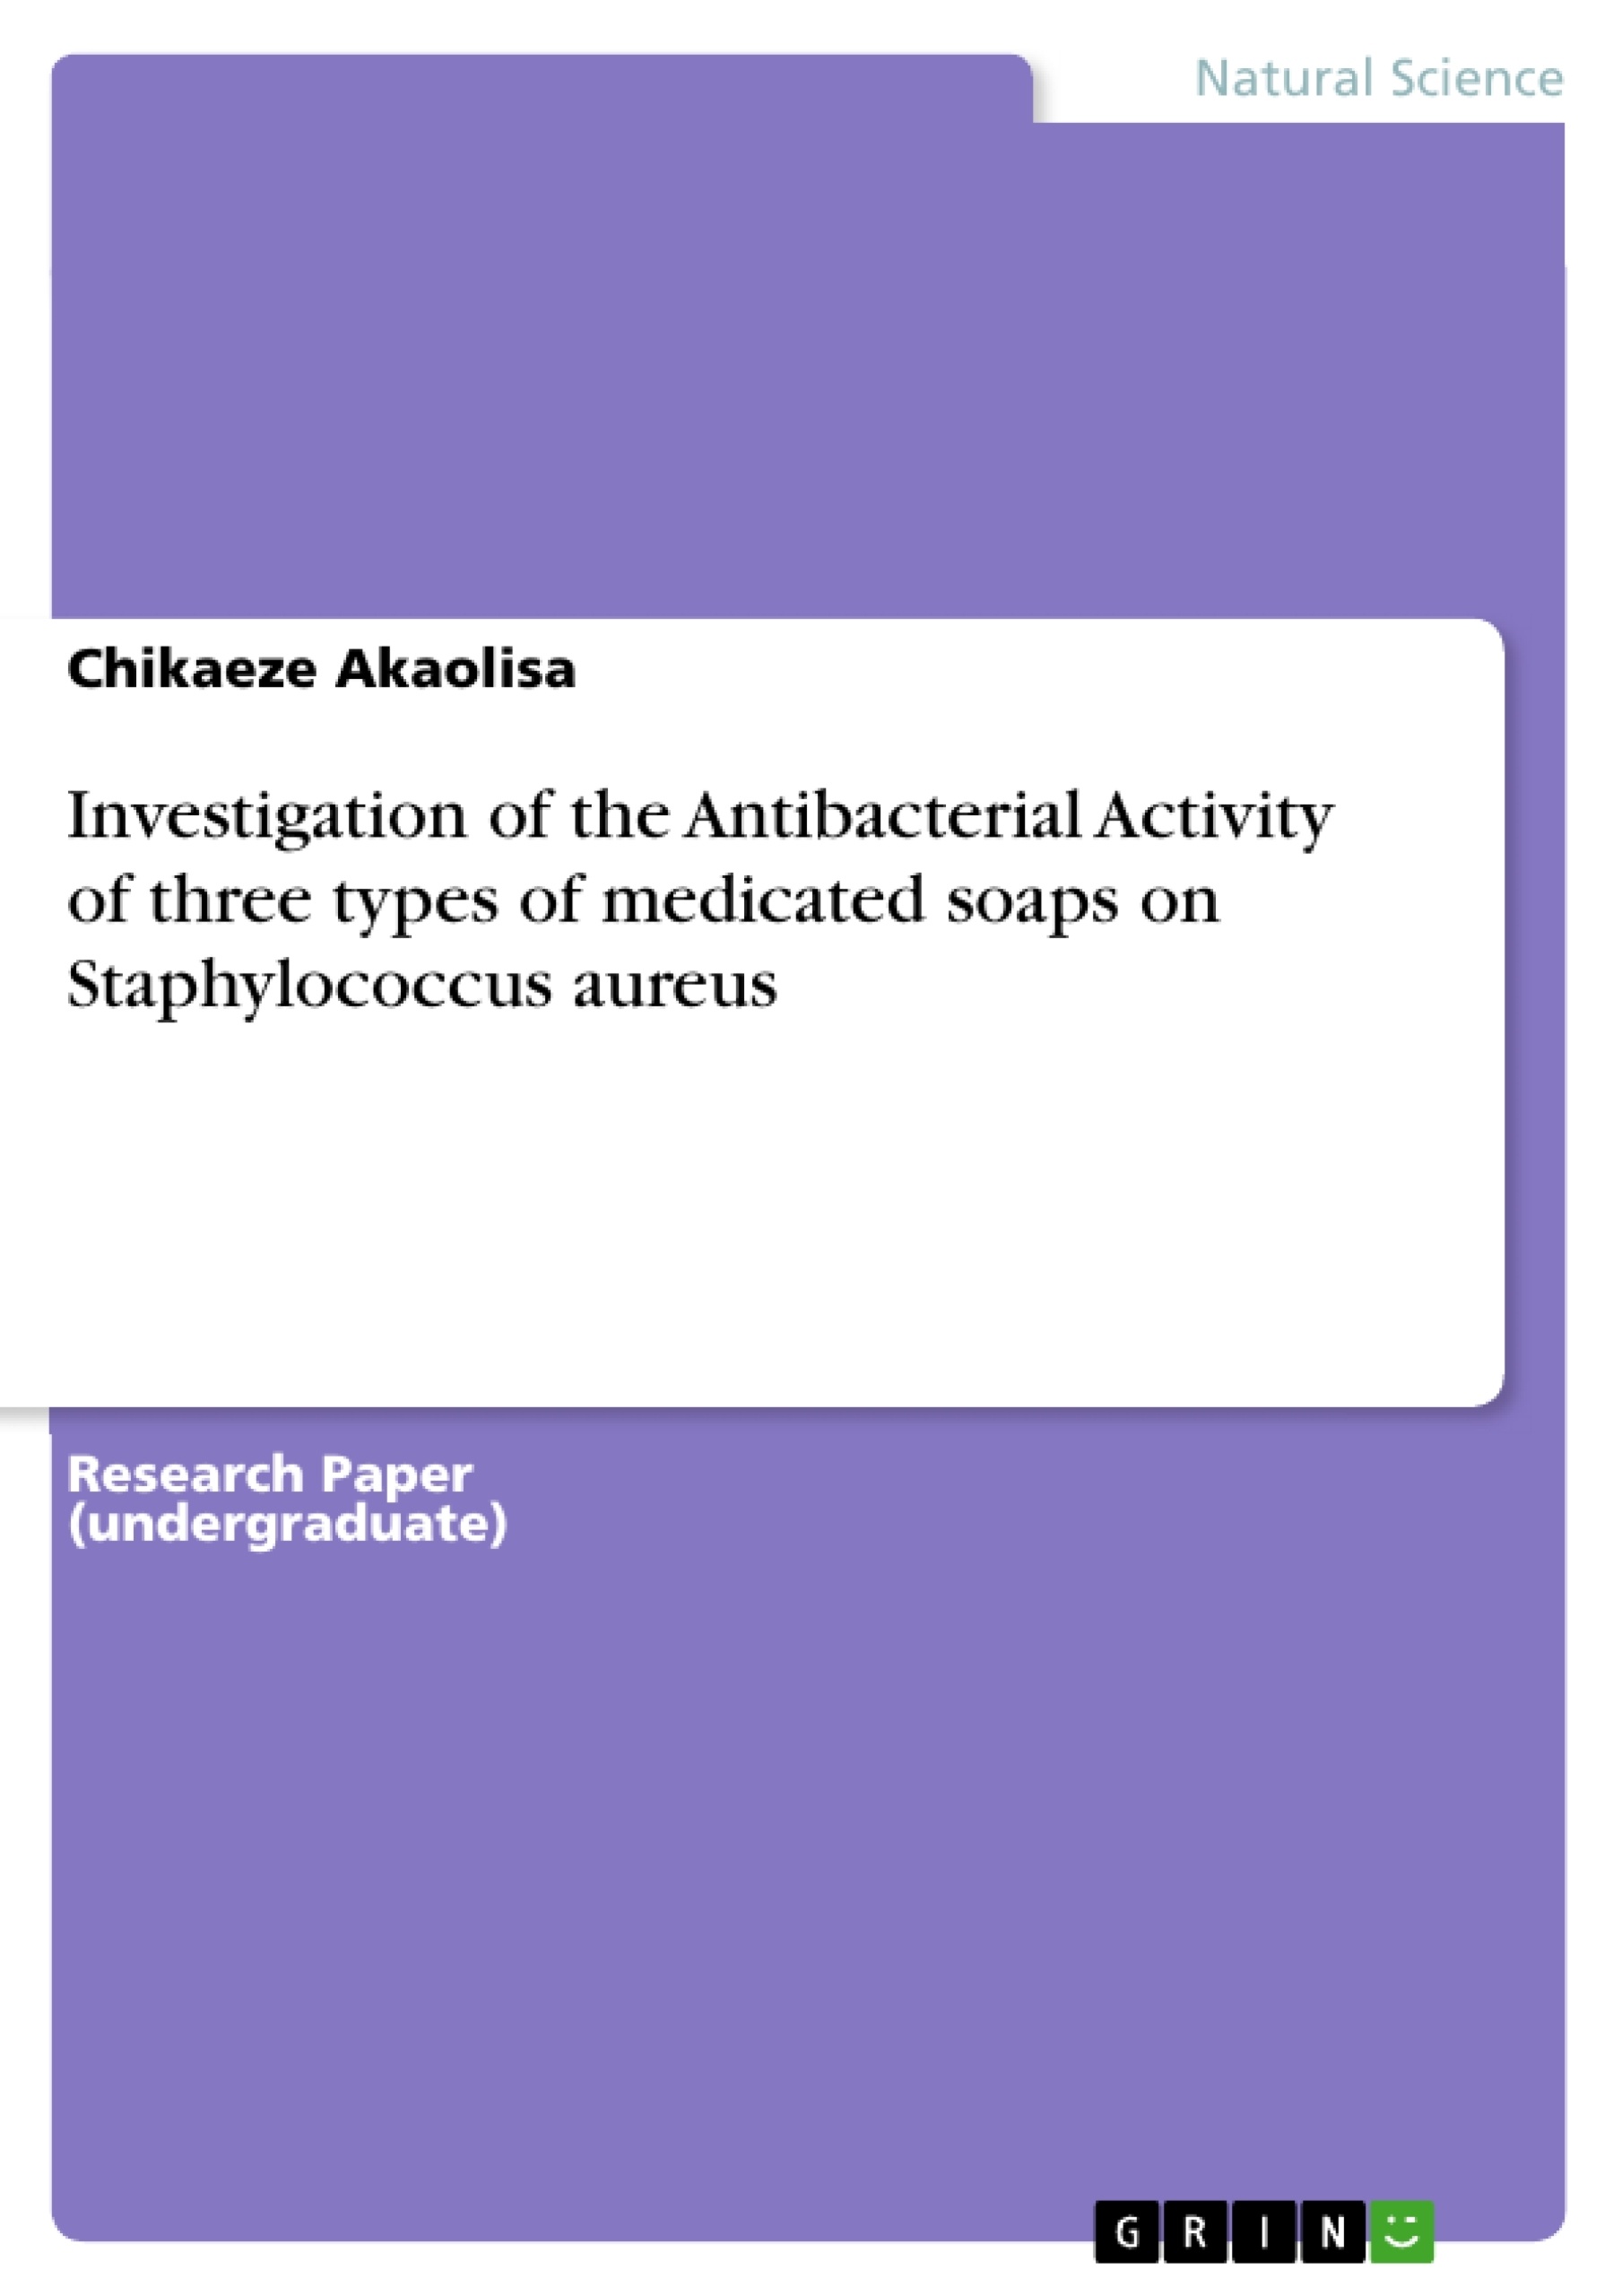 Título: Investigation of the Antibacterial Activity of three types of medicated soaps on Staphylococcus aureus